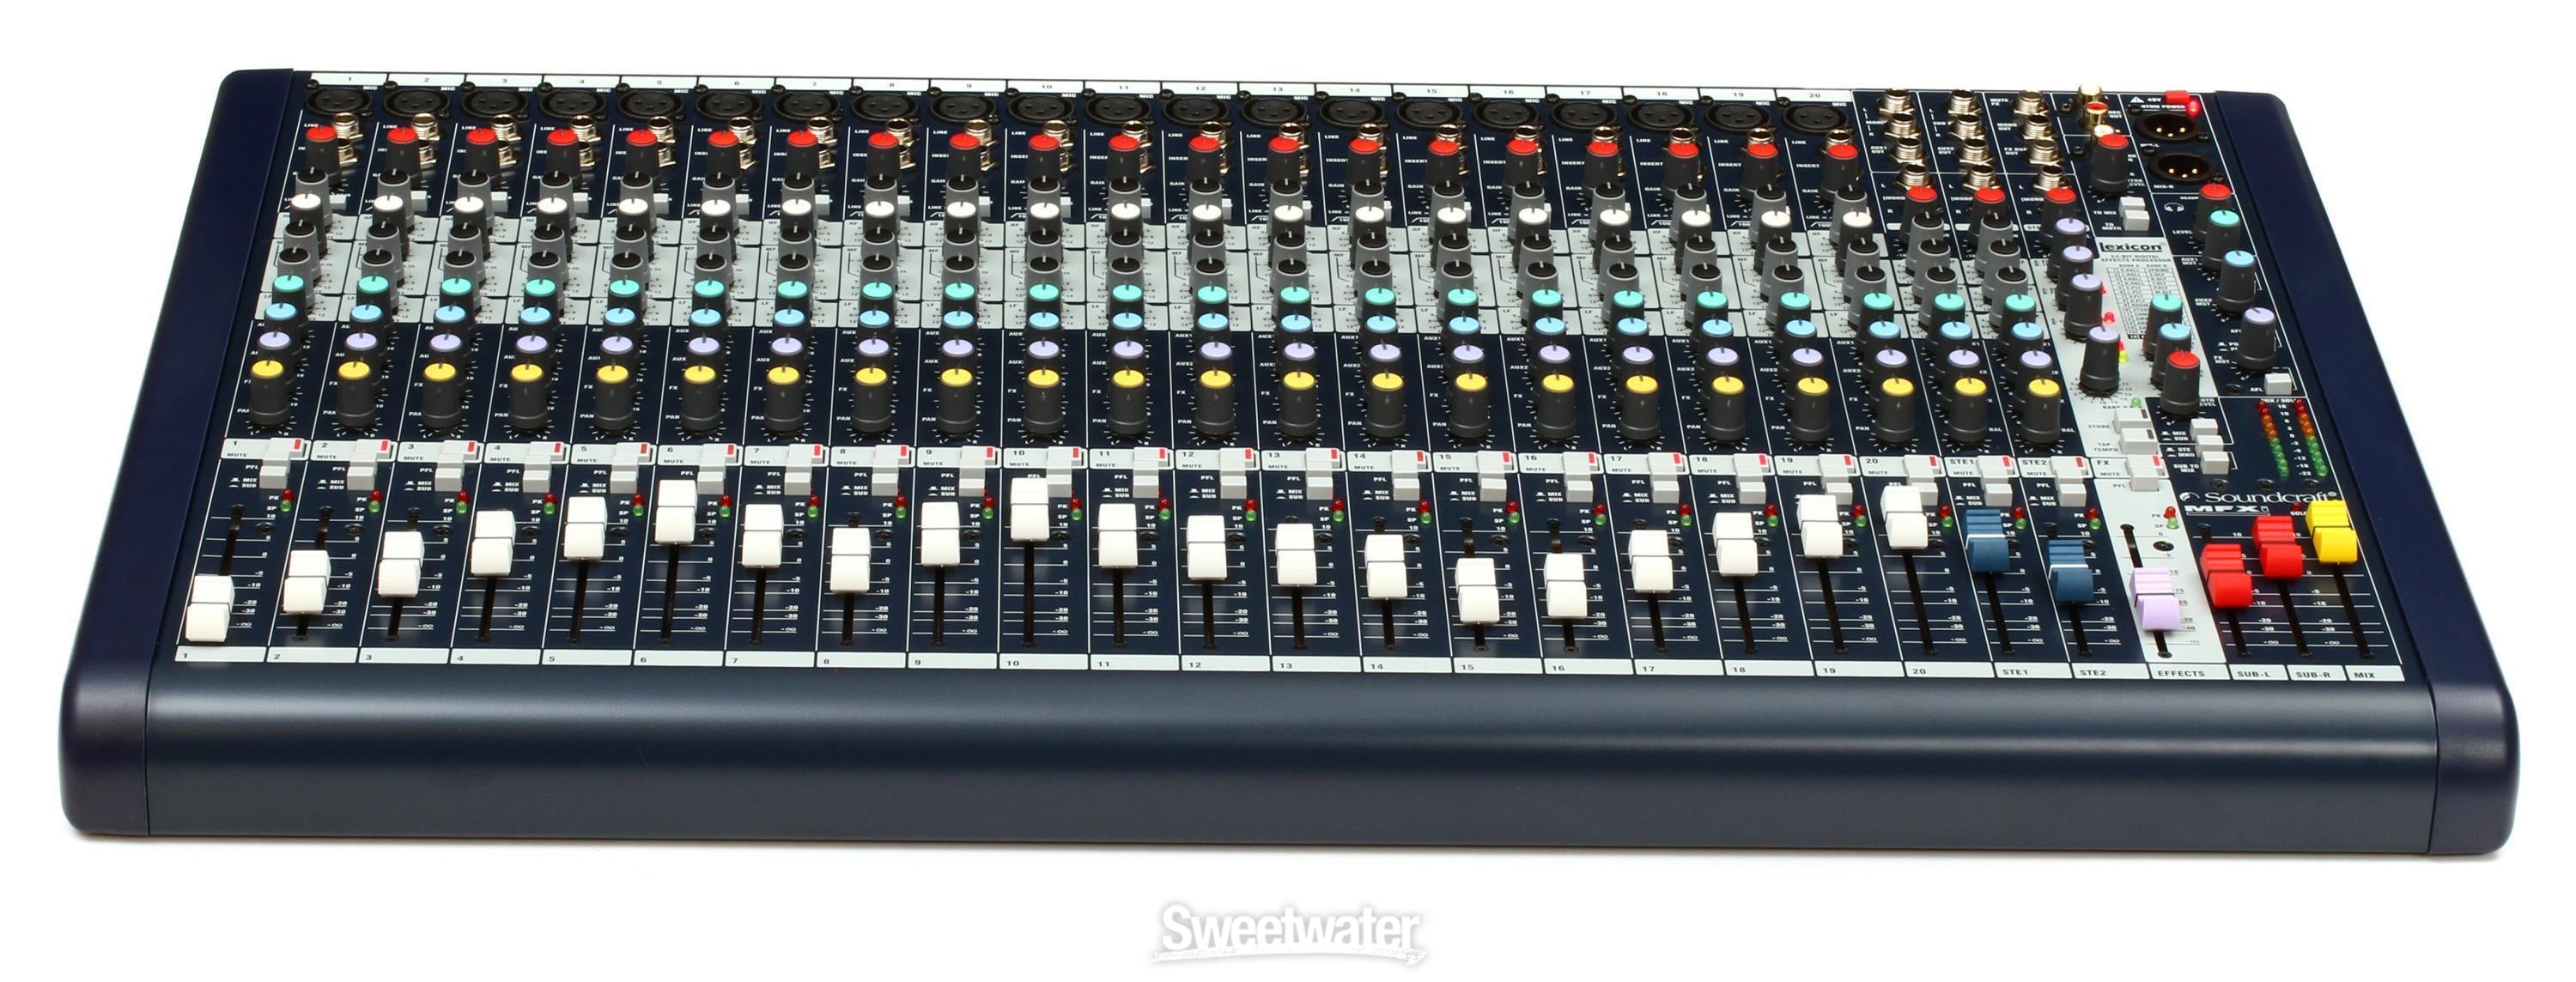 Soundcraft MFXi 20 Reviews | Sweetwater